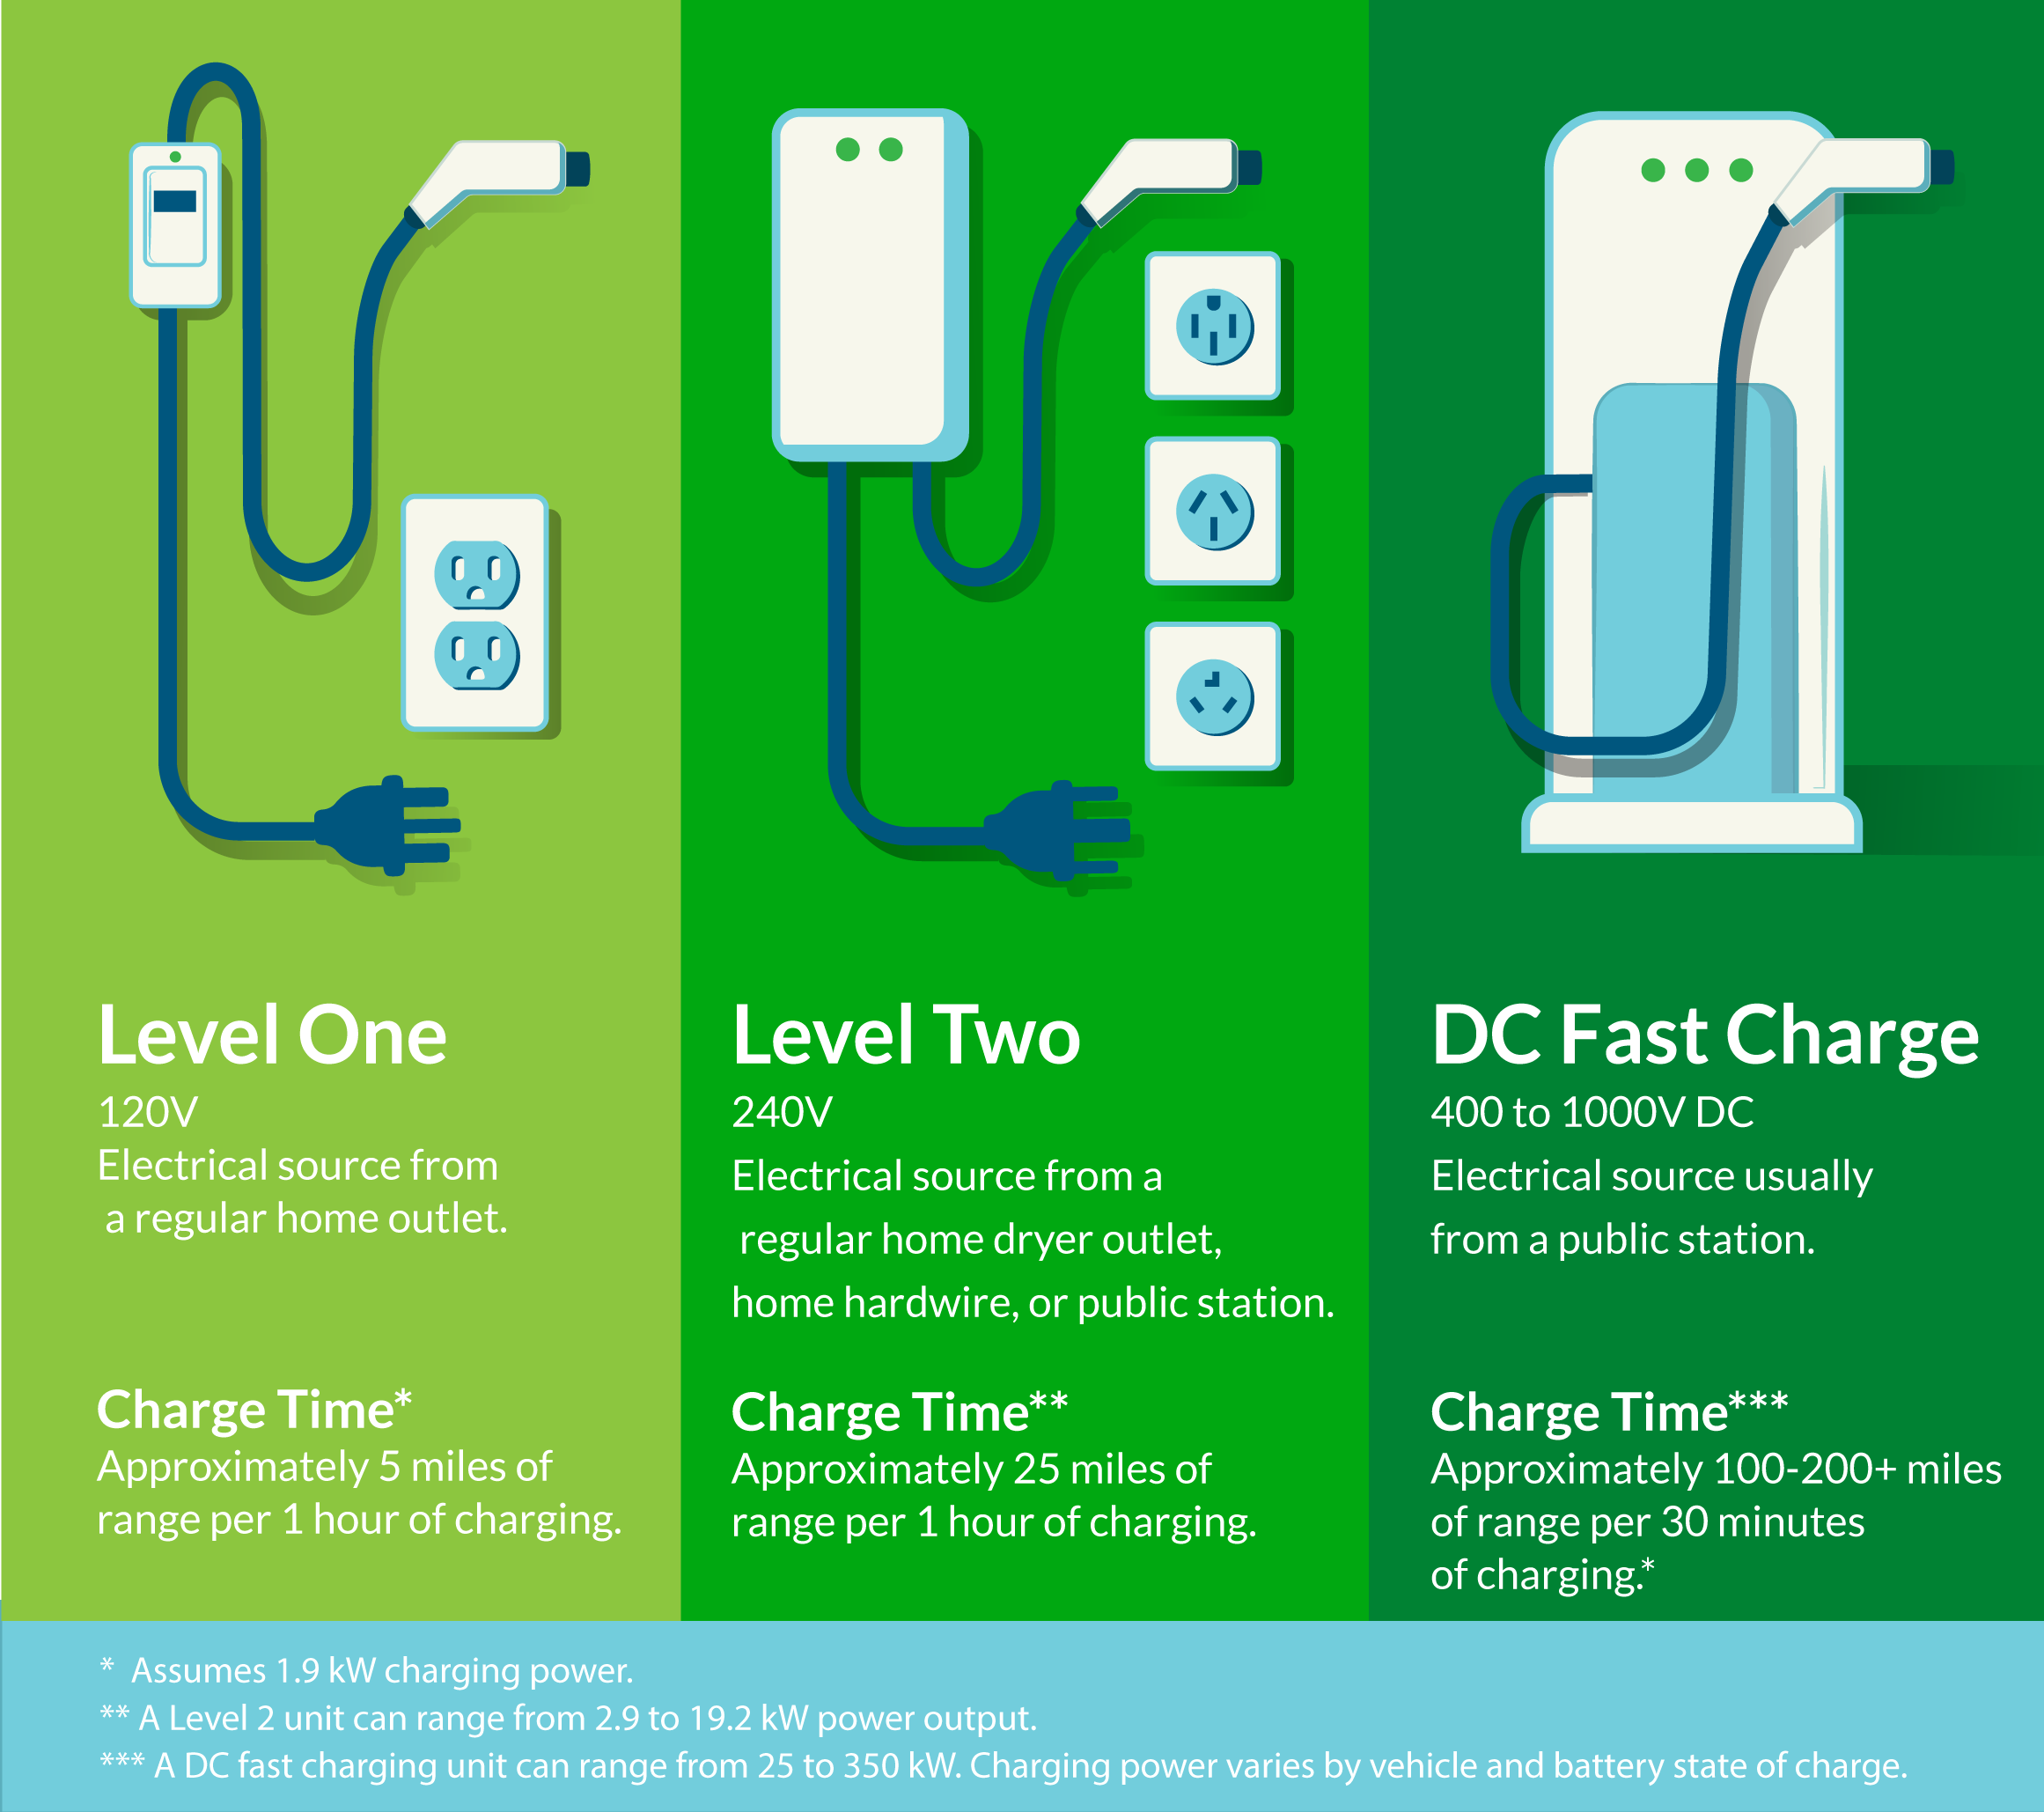 Levels of charging electric vehicles